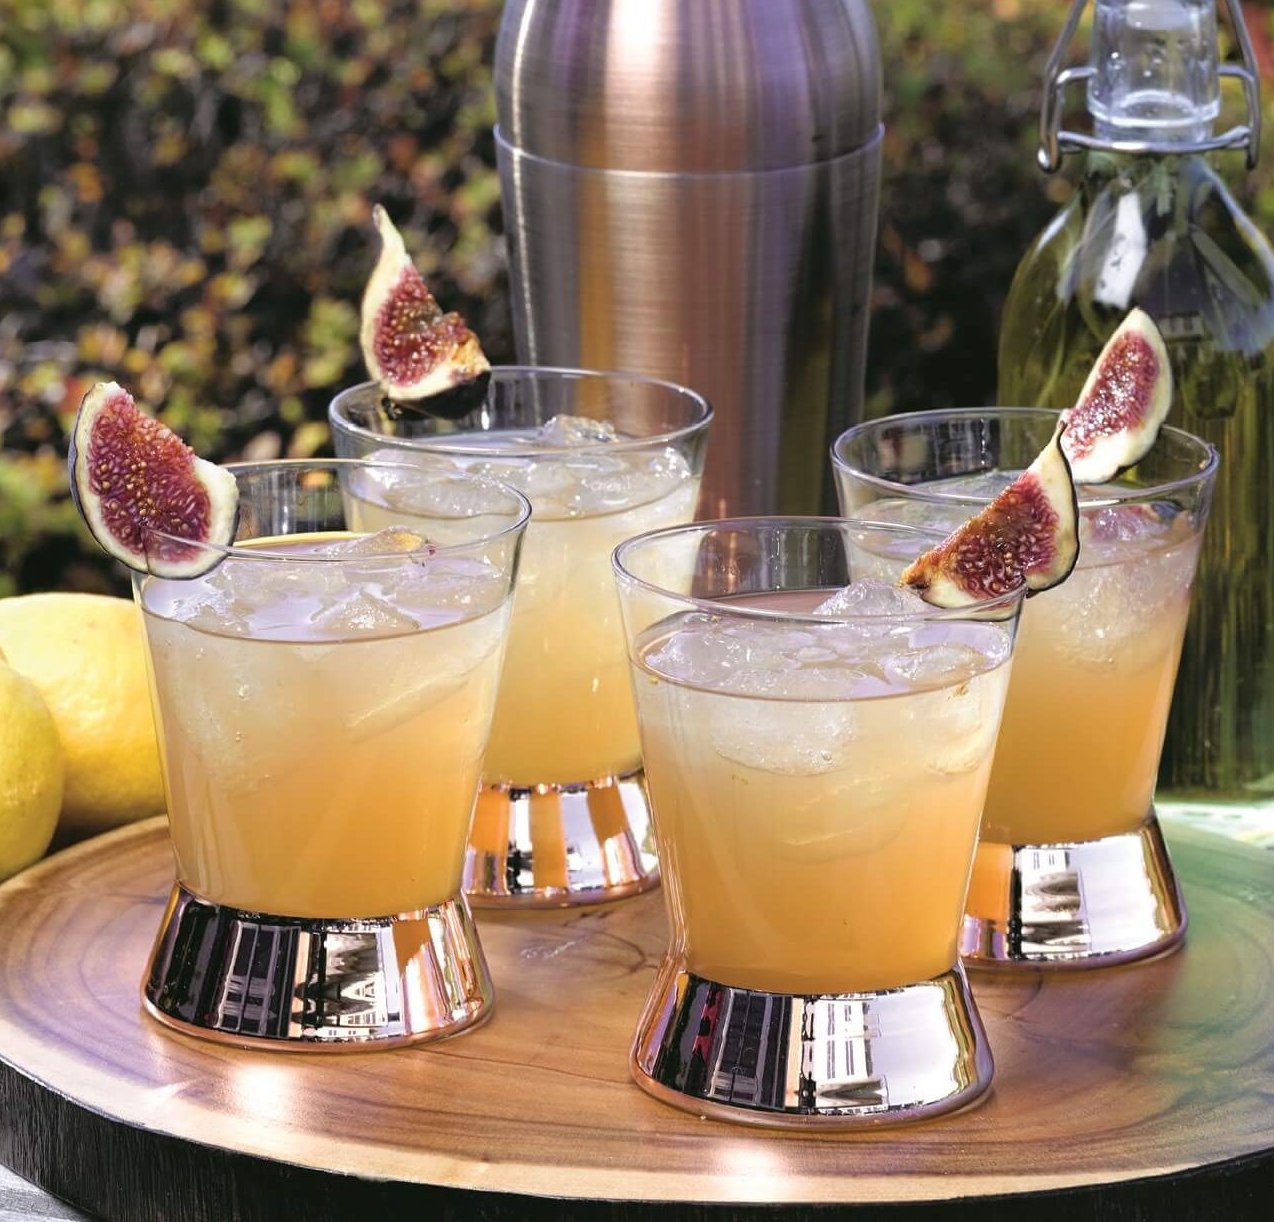 4 glasses with liquid and cocktail shaker outside on tray